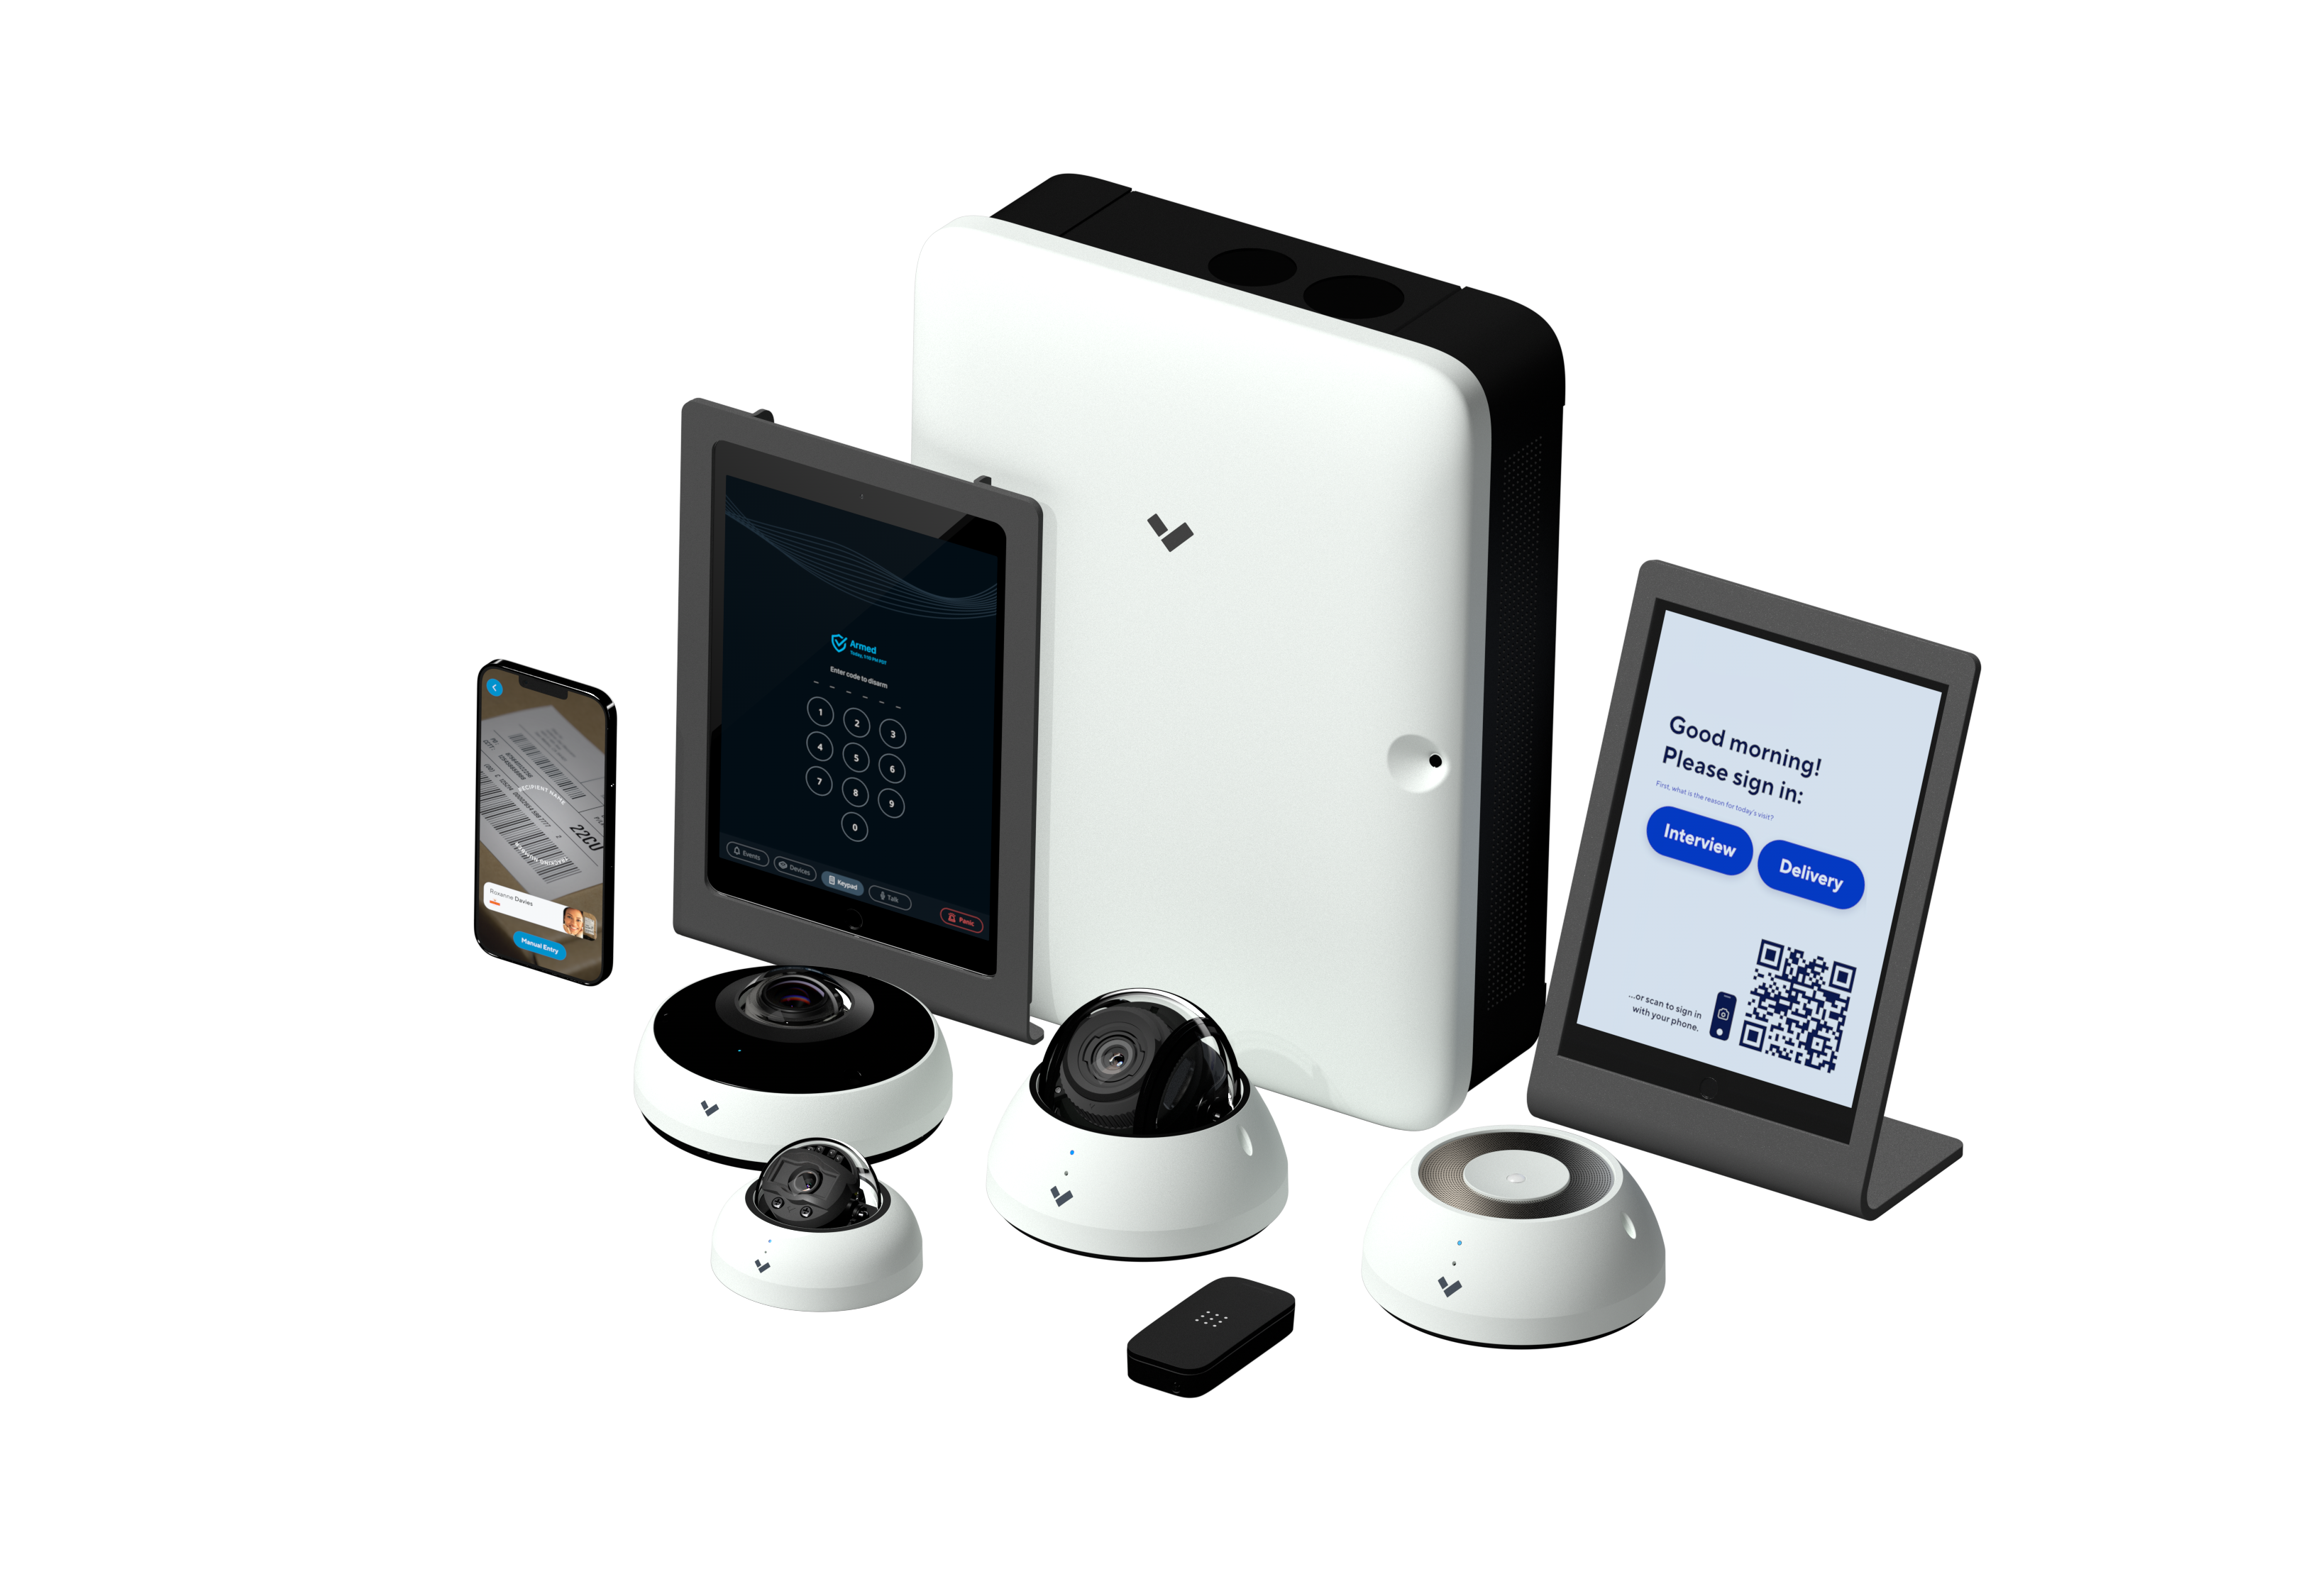 Verkada security devices, including security cameras for storage units.